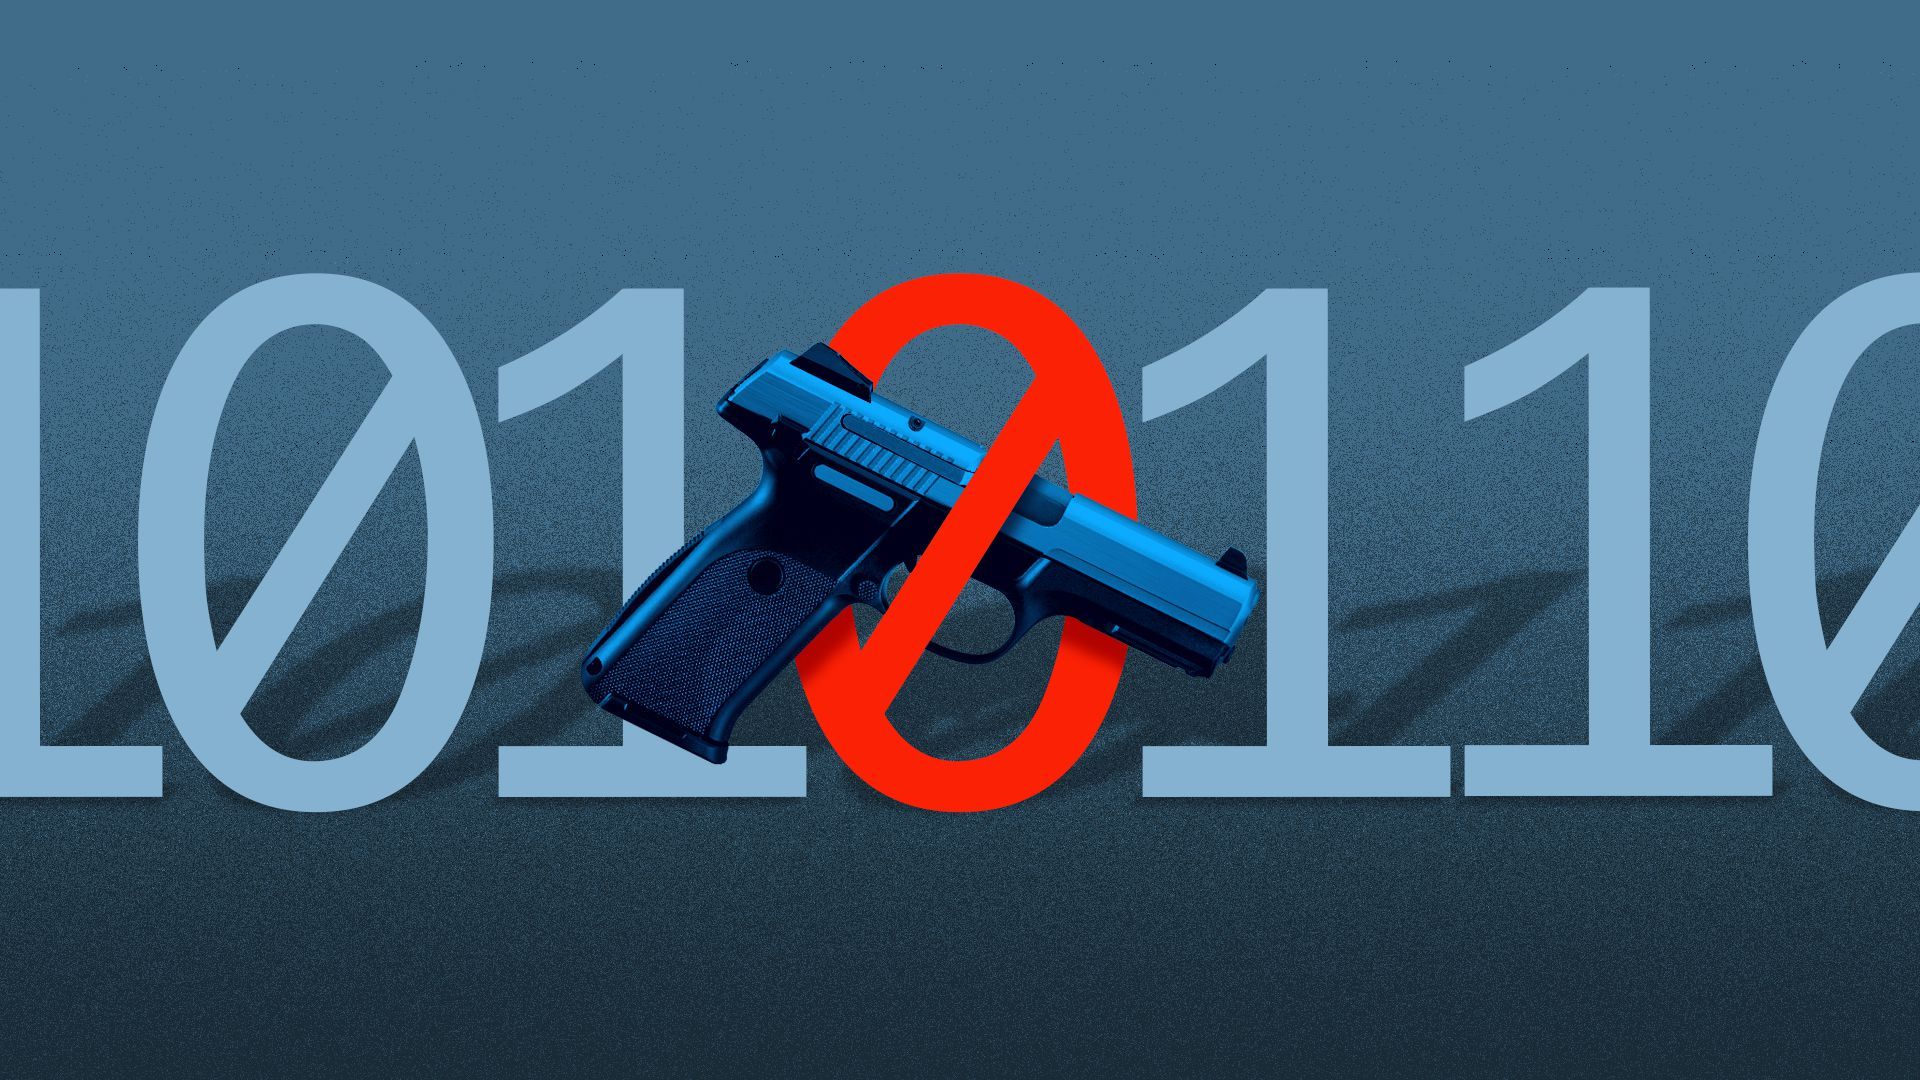 Illustration of a gun captured by binary code